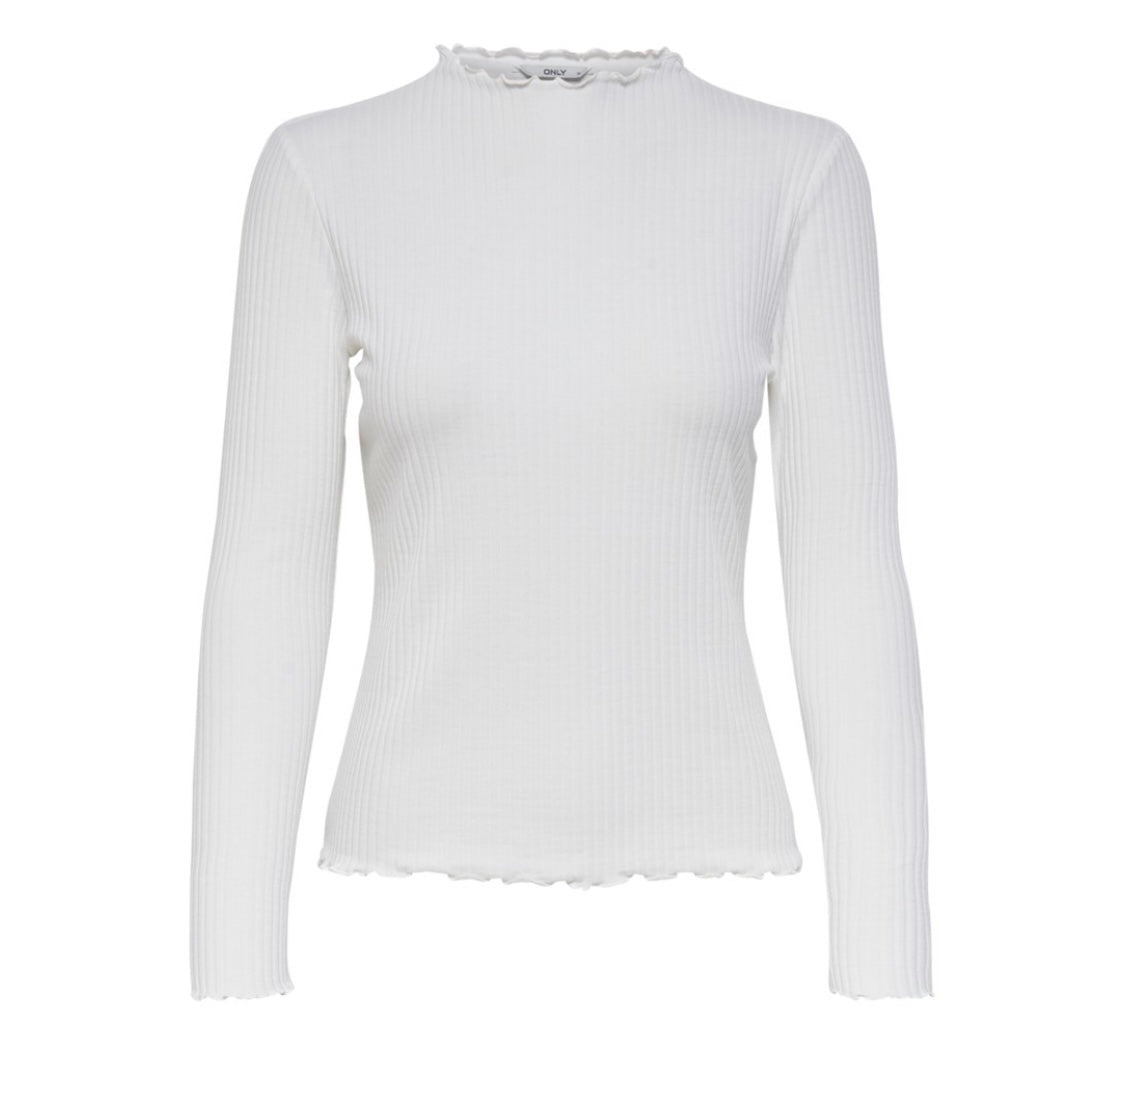 ONLY - EMMA HIGH NECK L/S TOP - WHITE